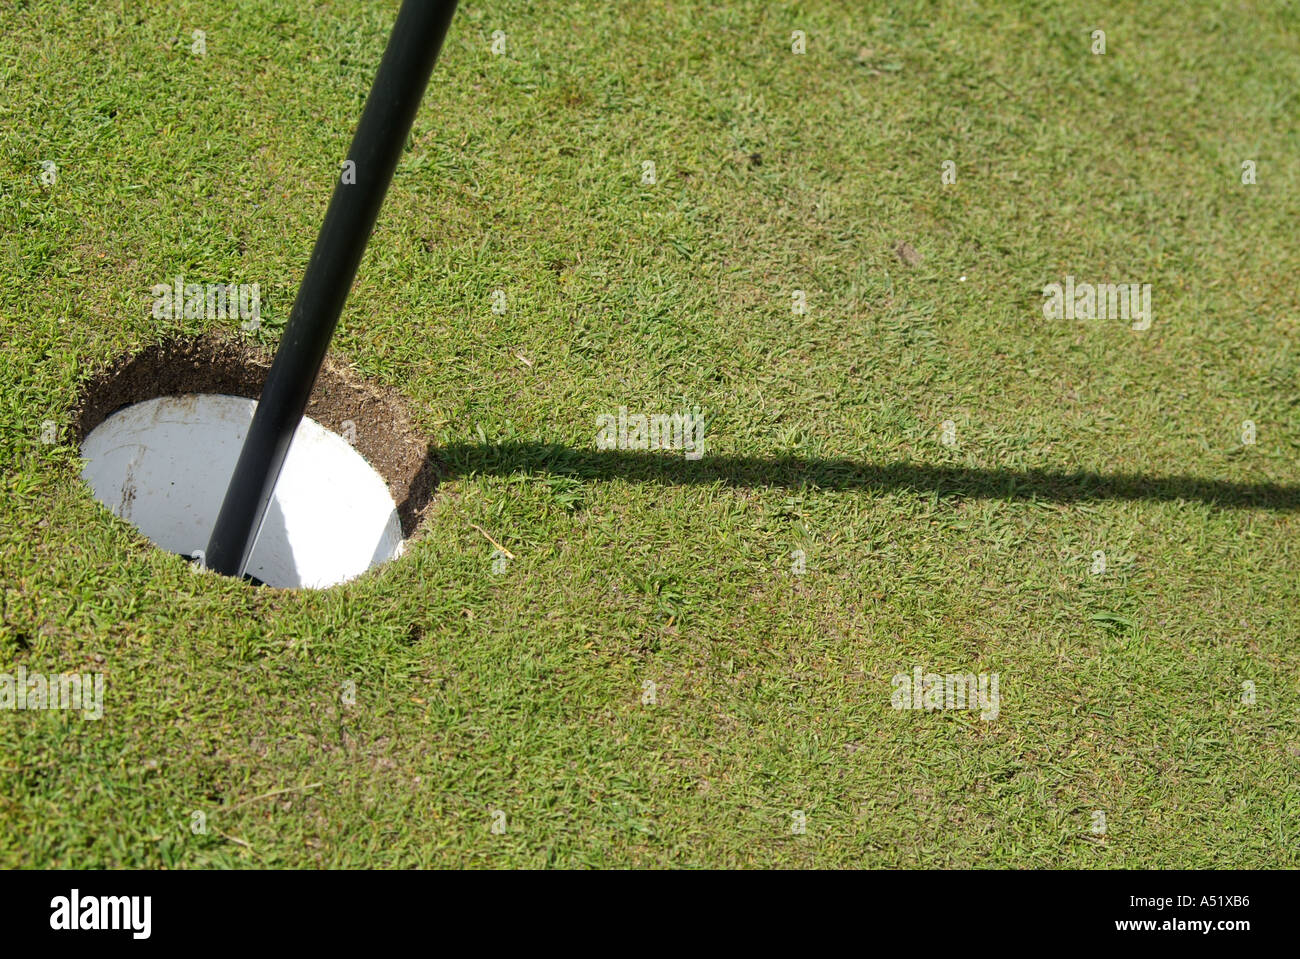 Golf putt and shadow of a golf tee and flag on the green grass. England Stock Photo